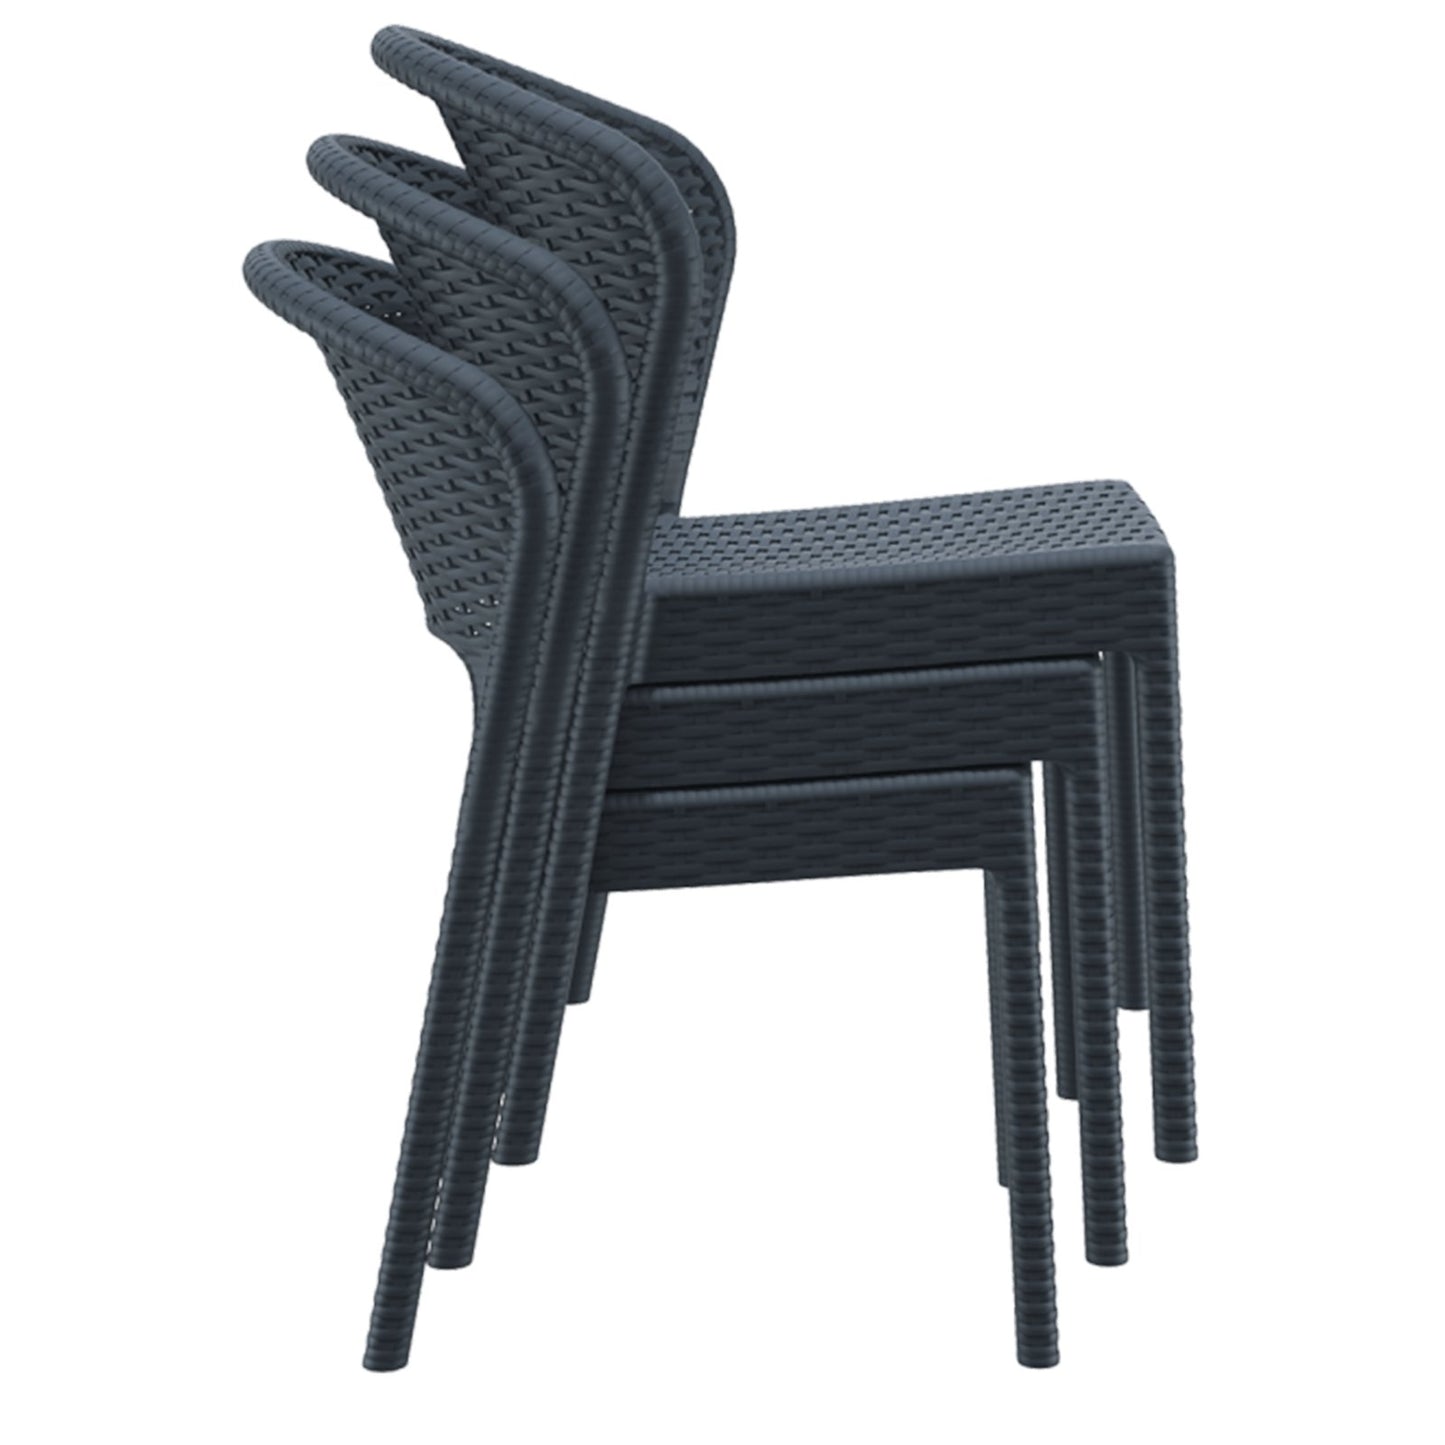 Clovelly | Coastal, Stackable, Plastic Outdoor Dining Chairs | Set Of 2 | Dark Grey